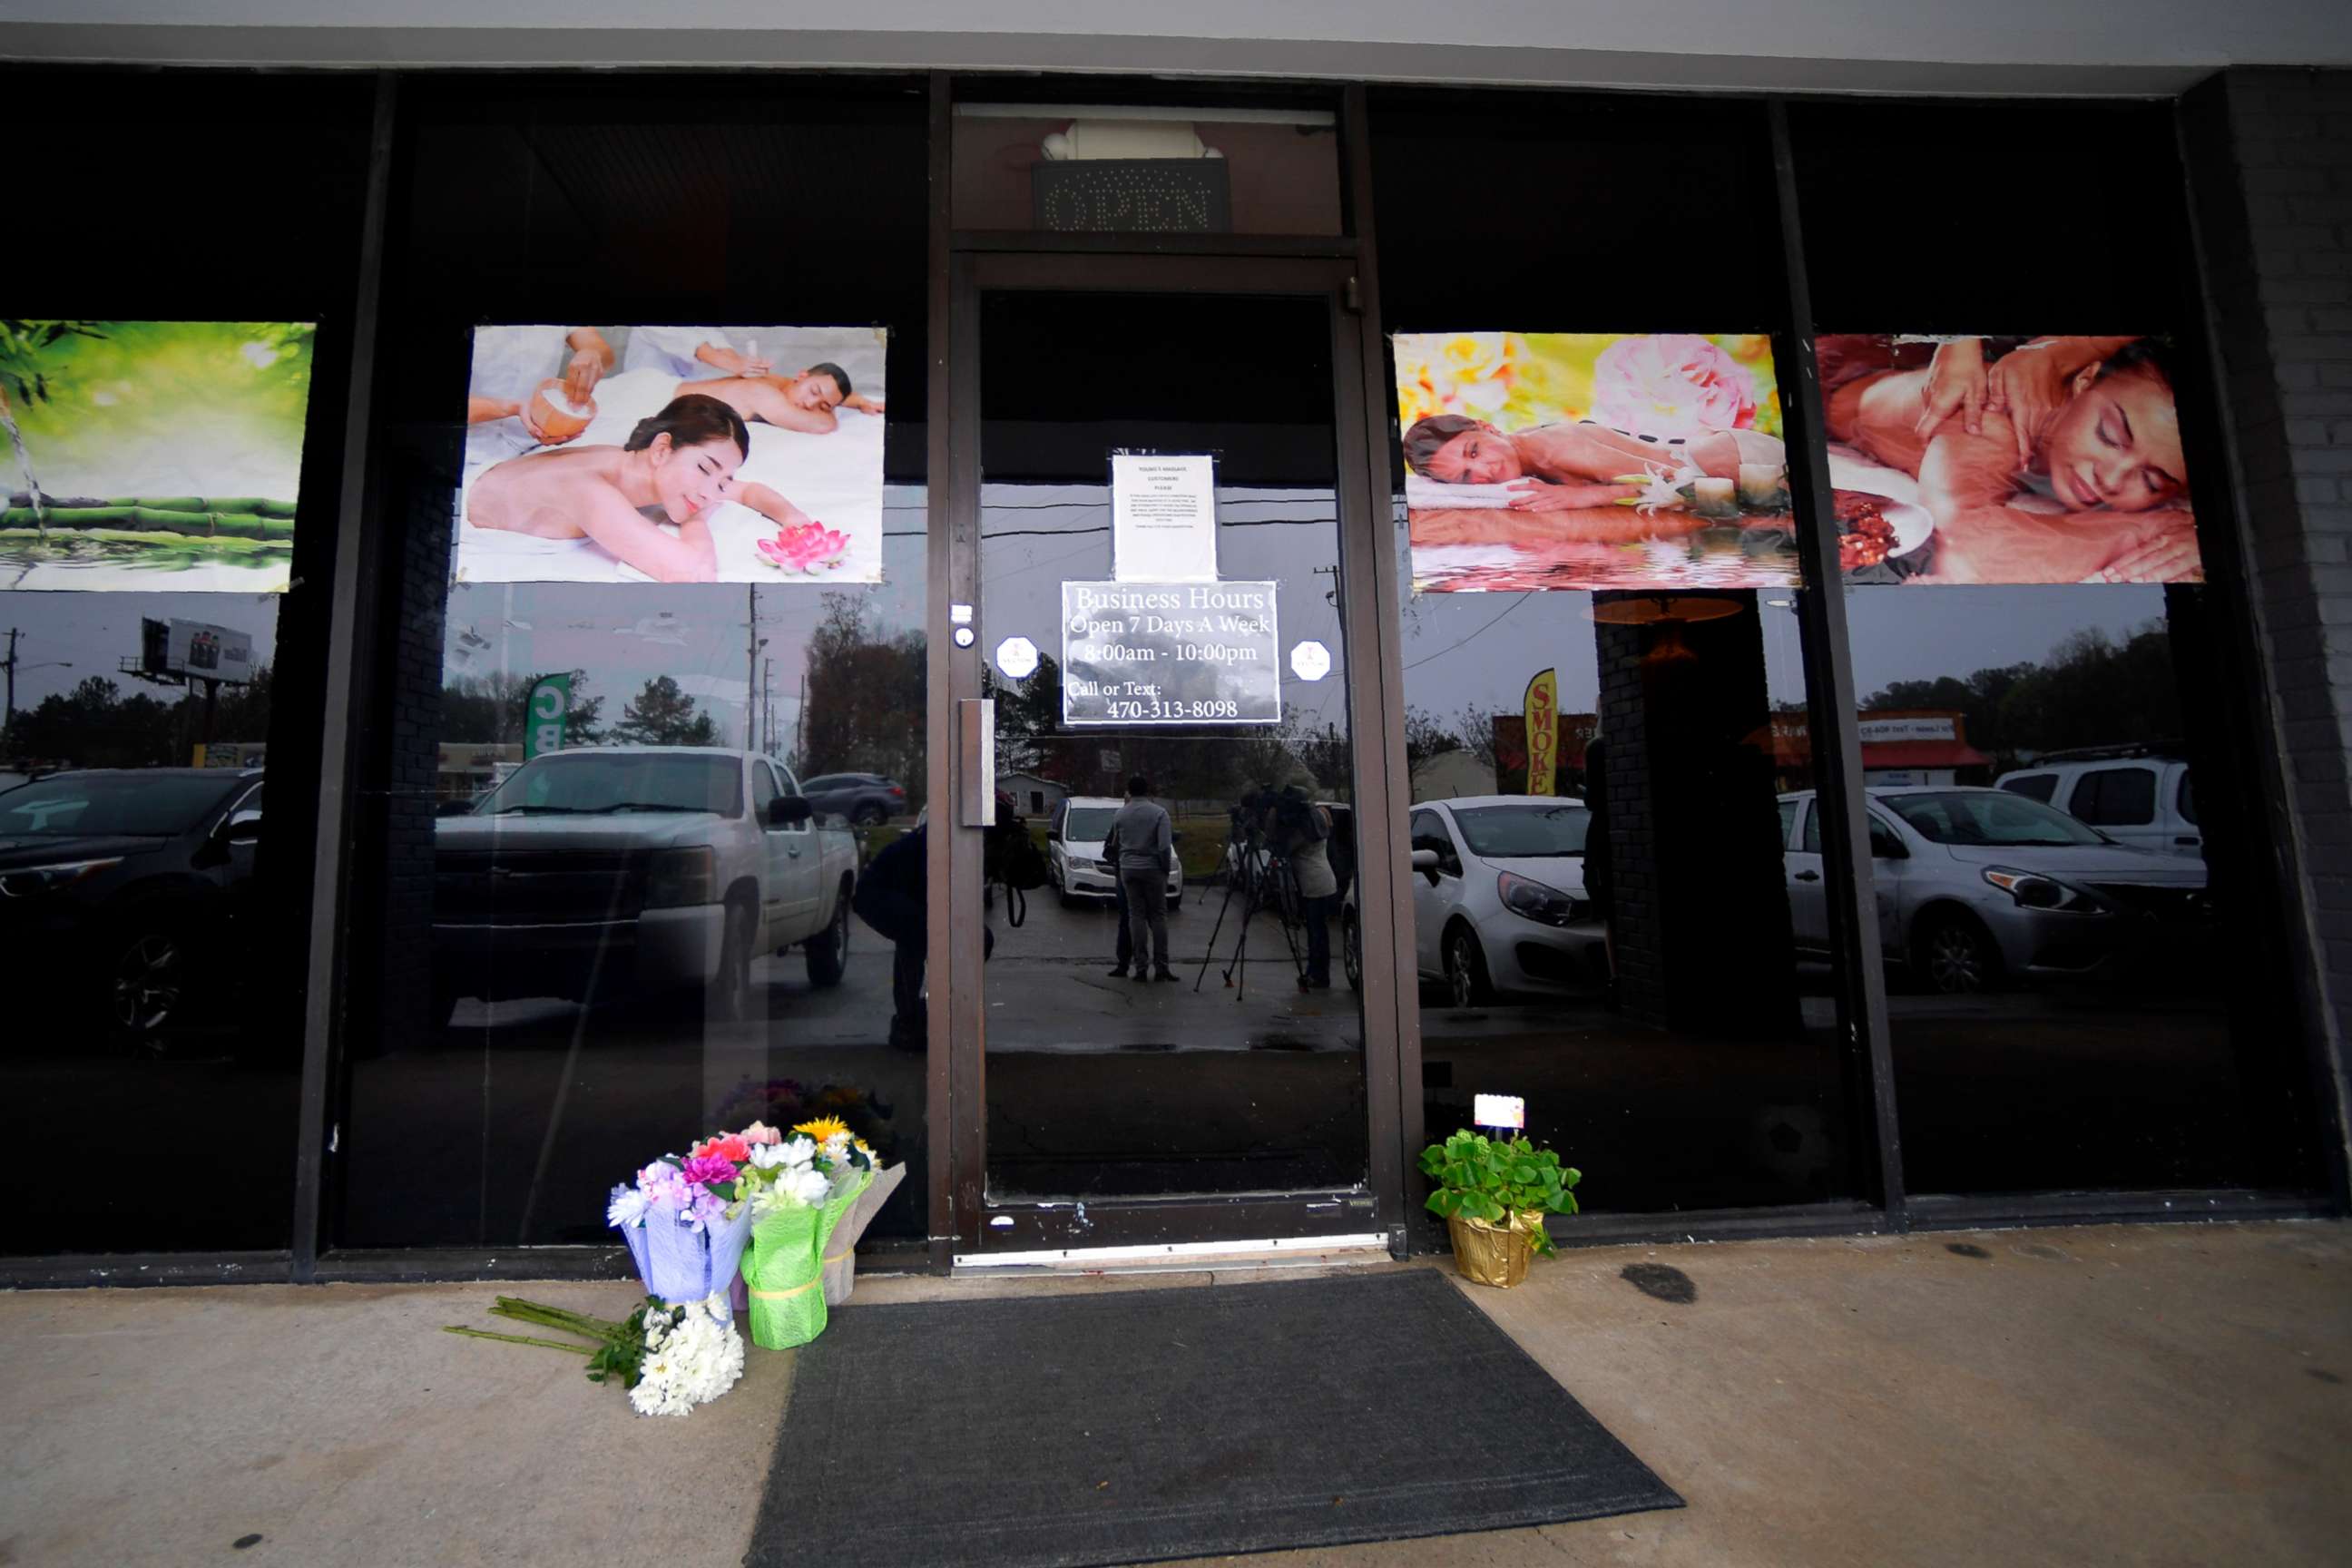 PHOTO: A make-shift memorial is seen outside a business, March 17, 2021, where a multiple fatal shooting occurred the day before, in Acworth, Ga.